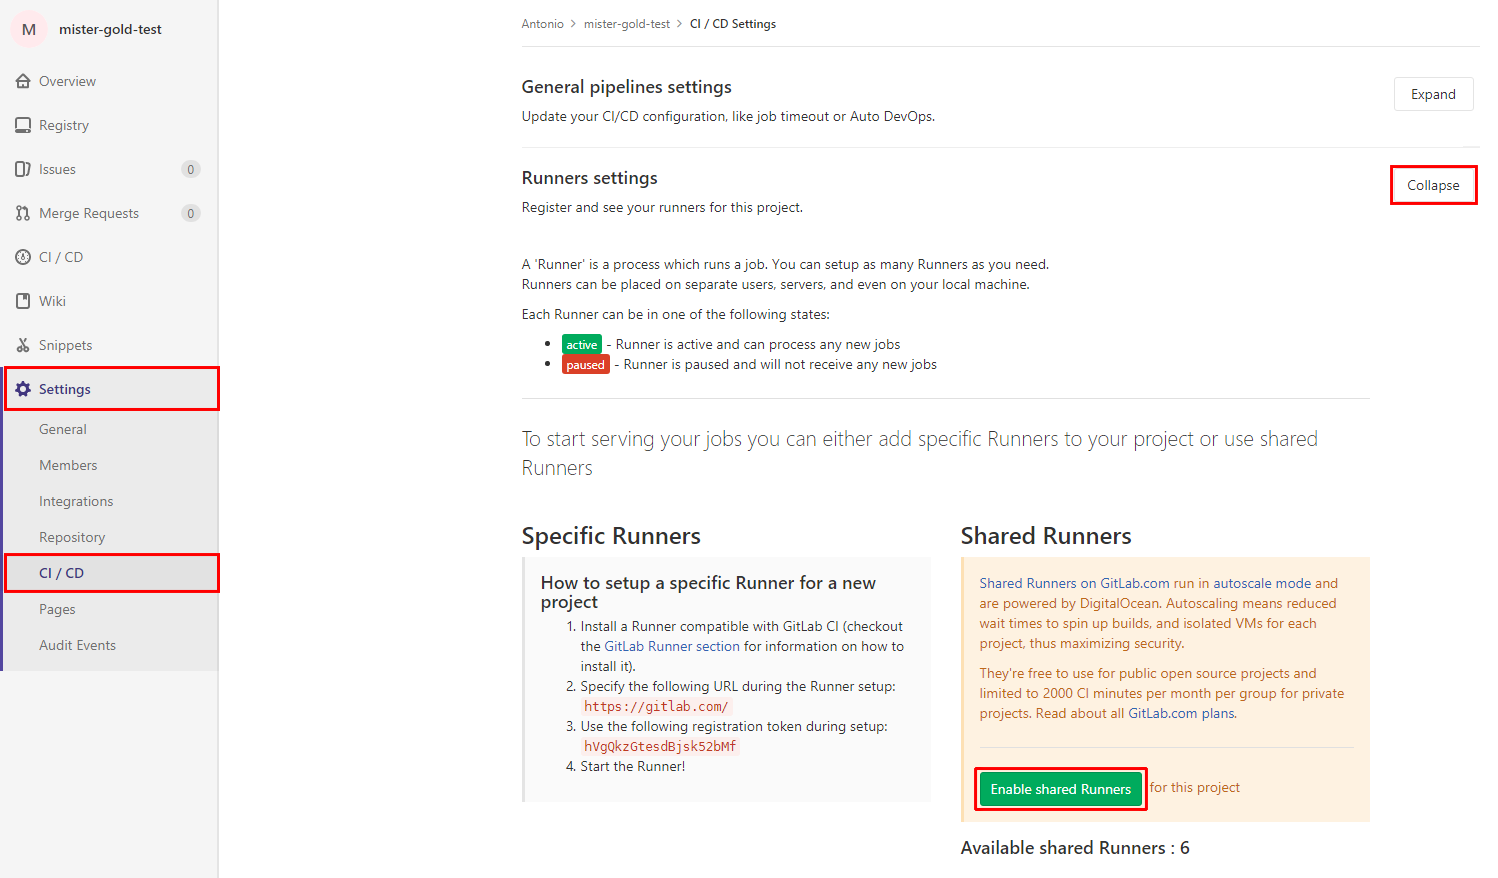 Enable Shared Runners